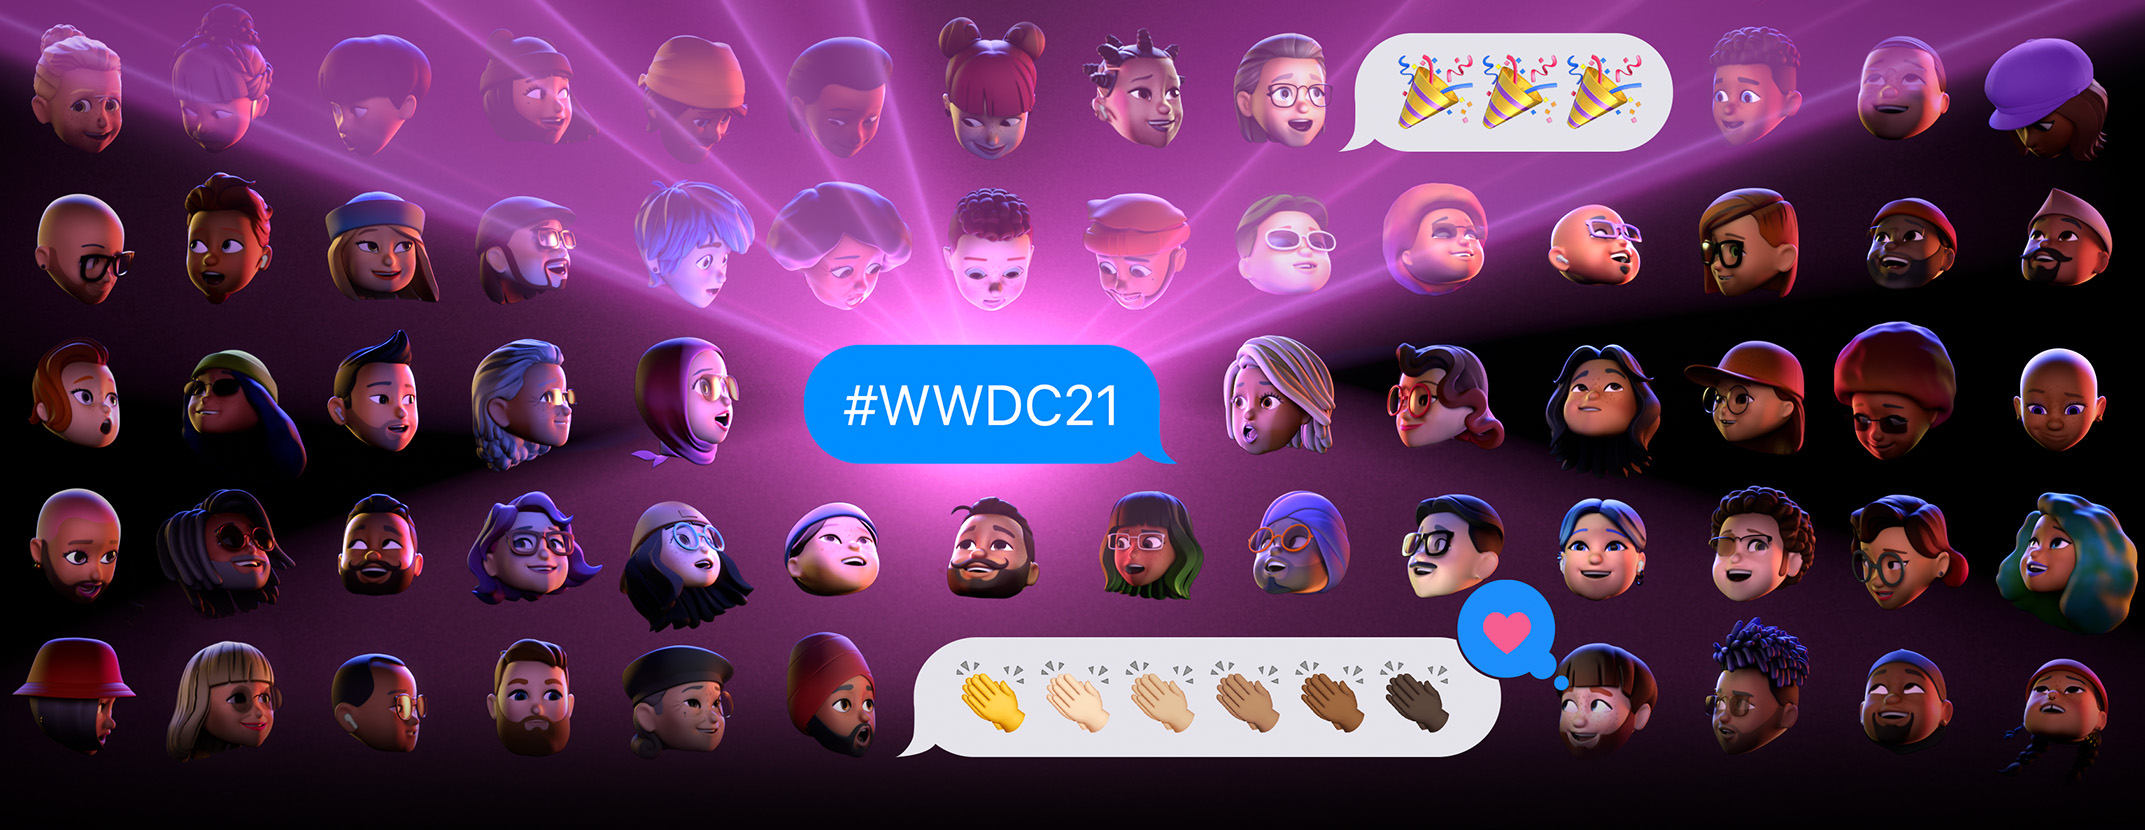 Apple WWDC 2021 recap – New features coming to iOS, iPadOS, macOS, watchOS and more